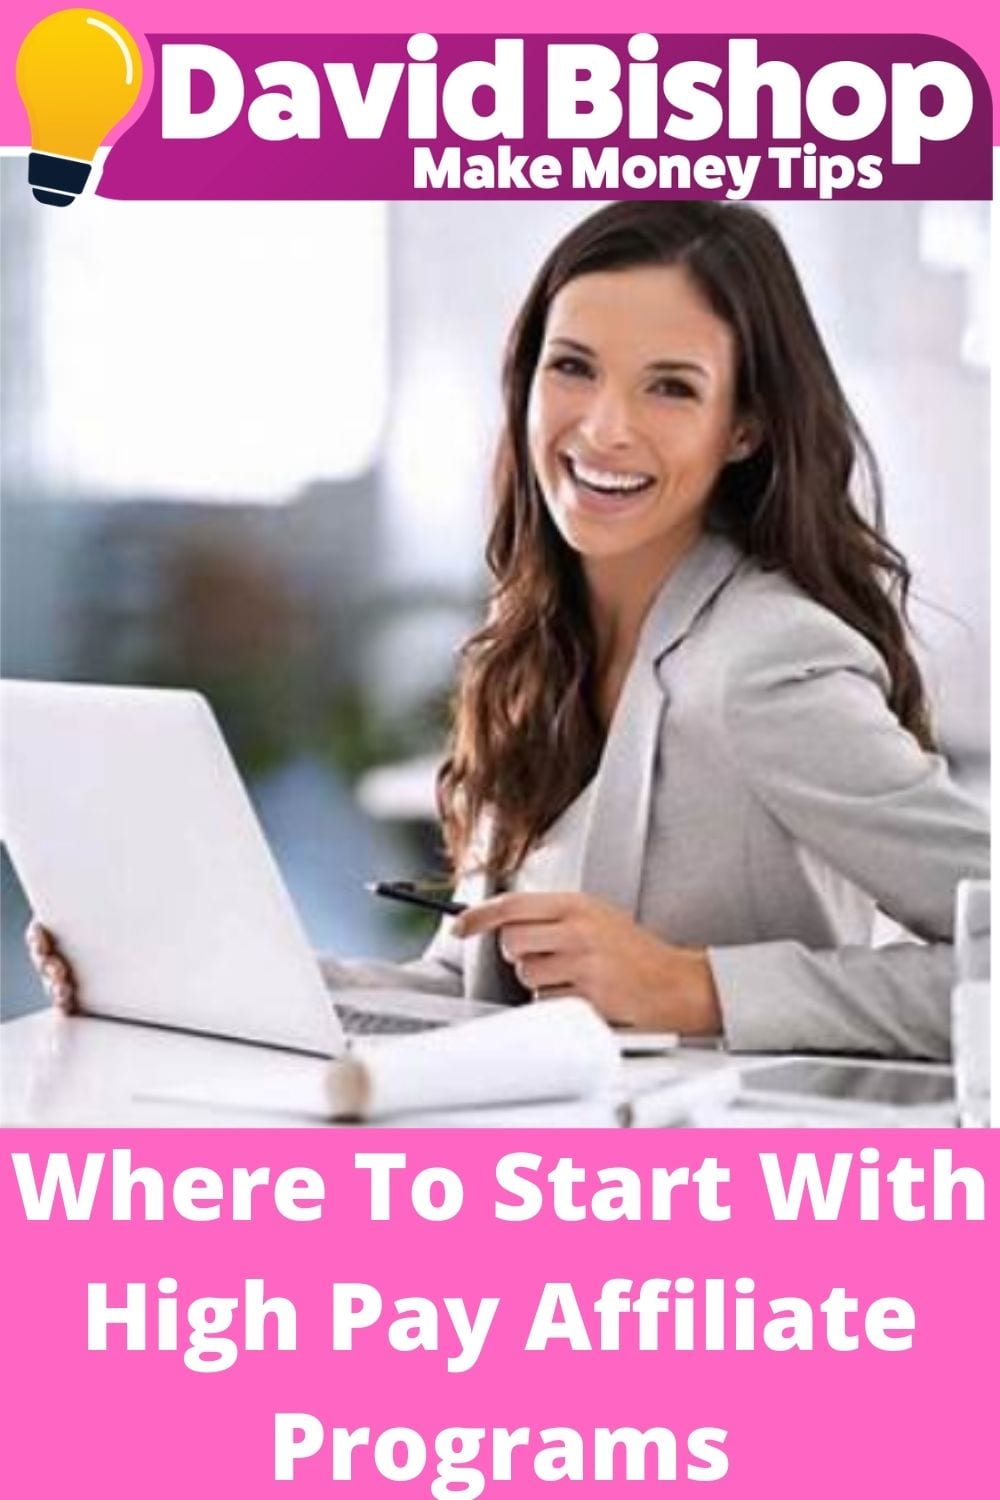 High Pay Affiliate Programs - Working from home with affiliate programs